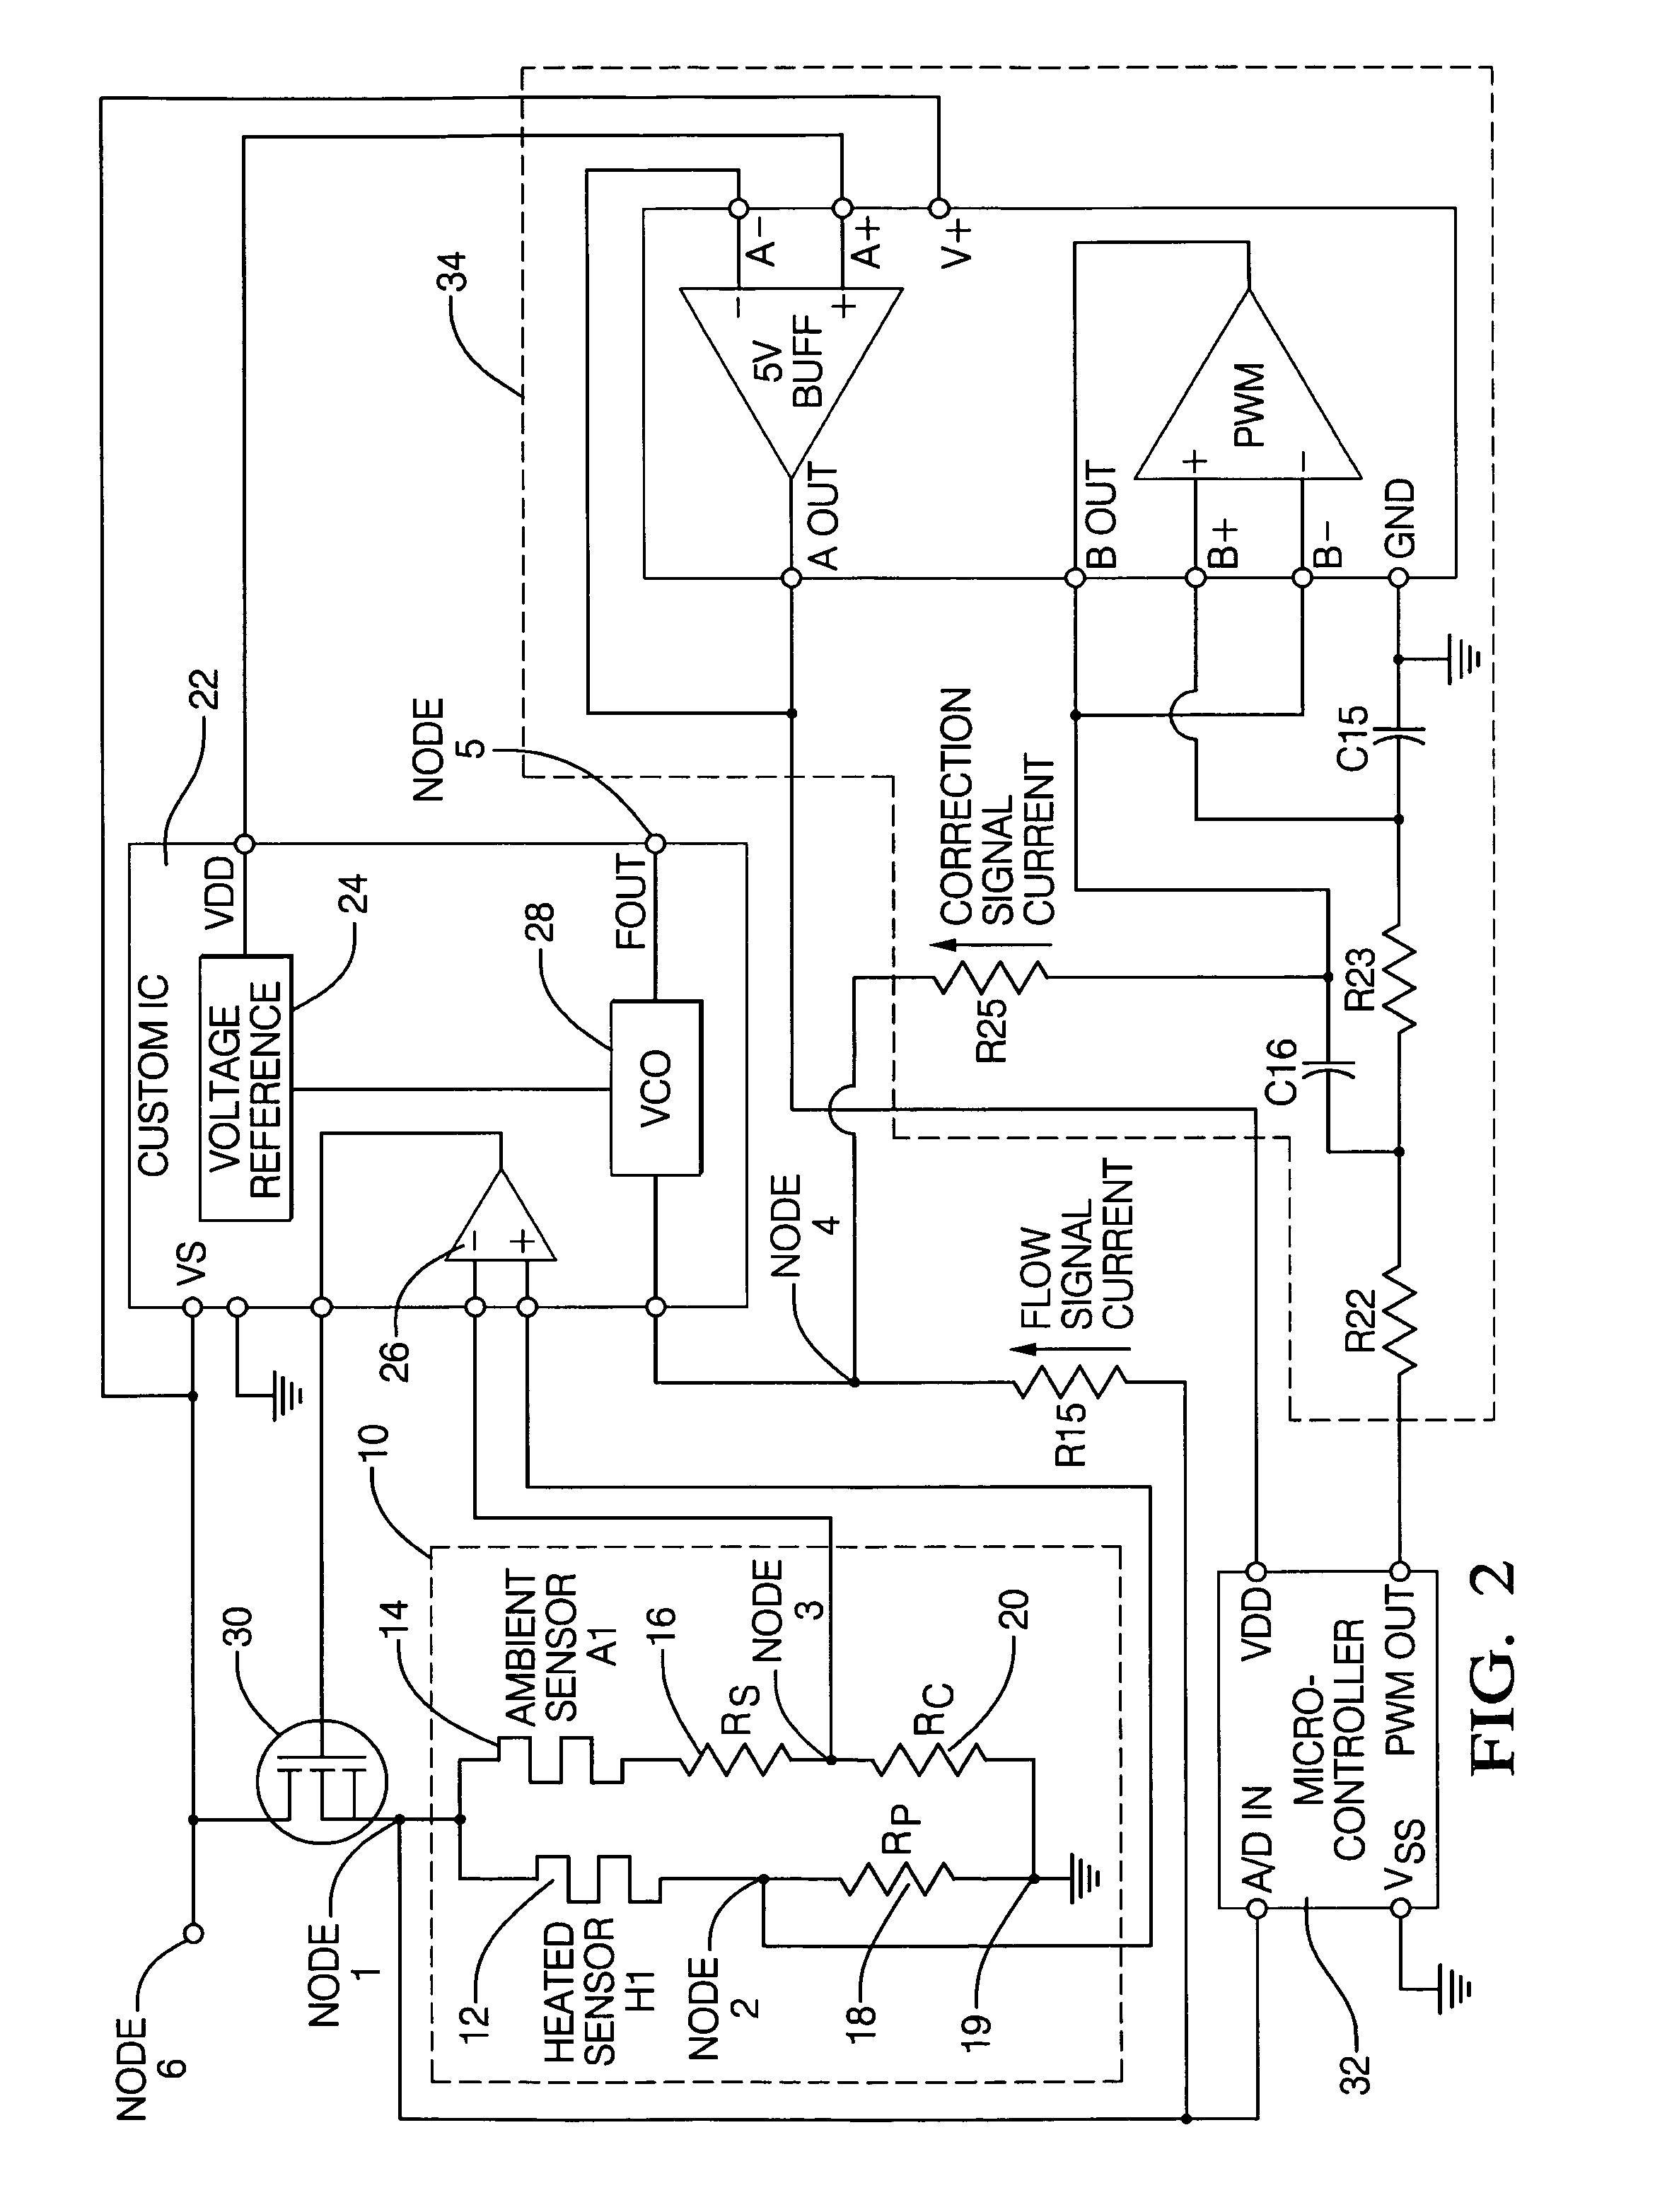 Mass air flow metering device and method